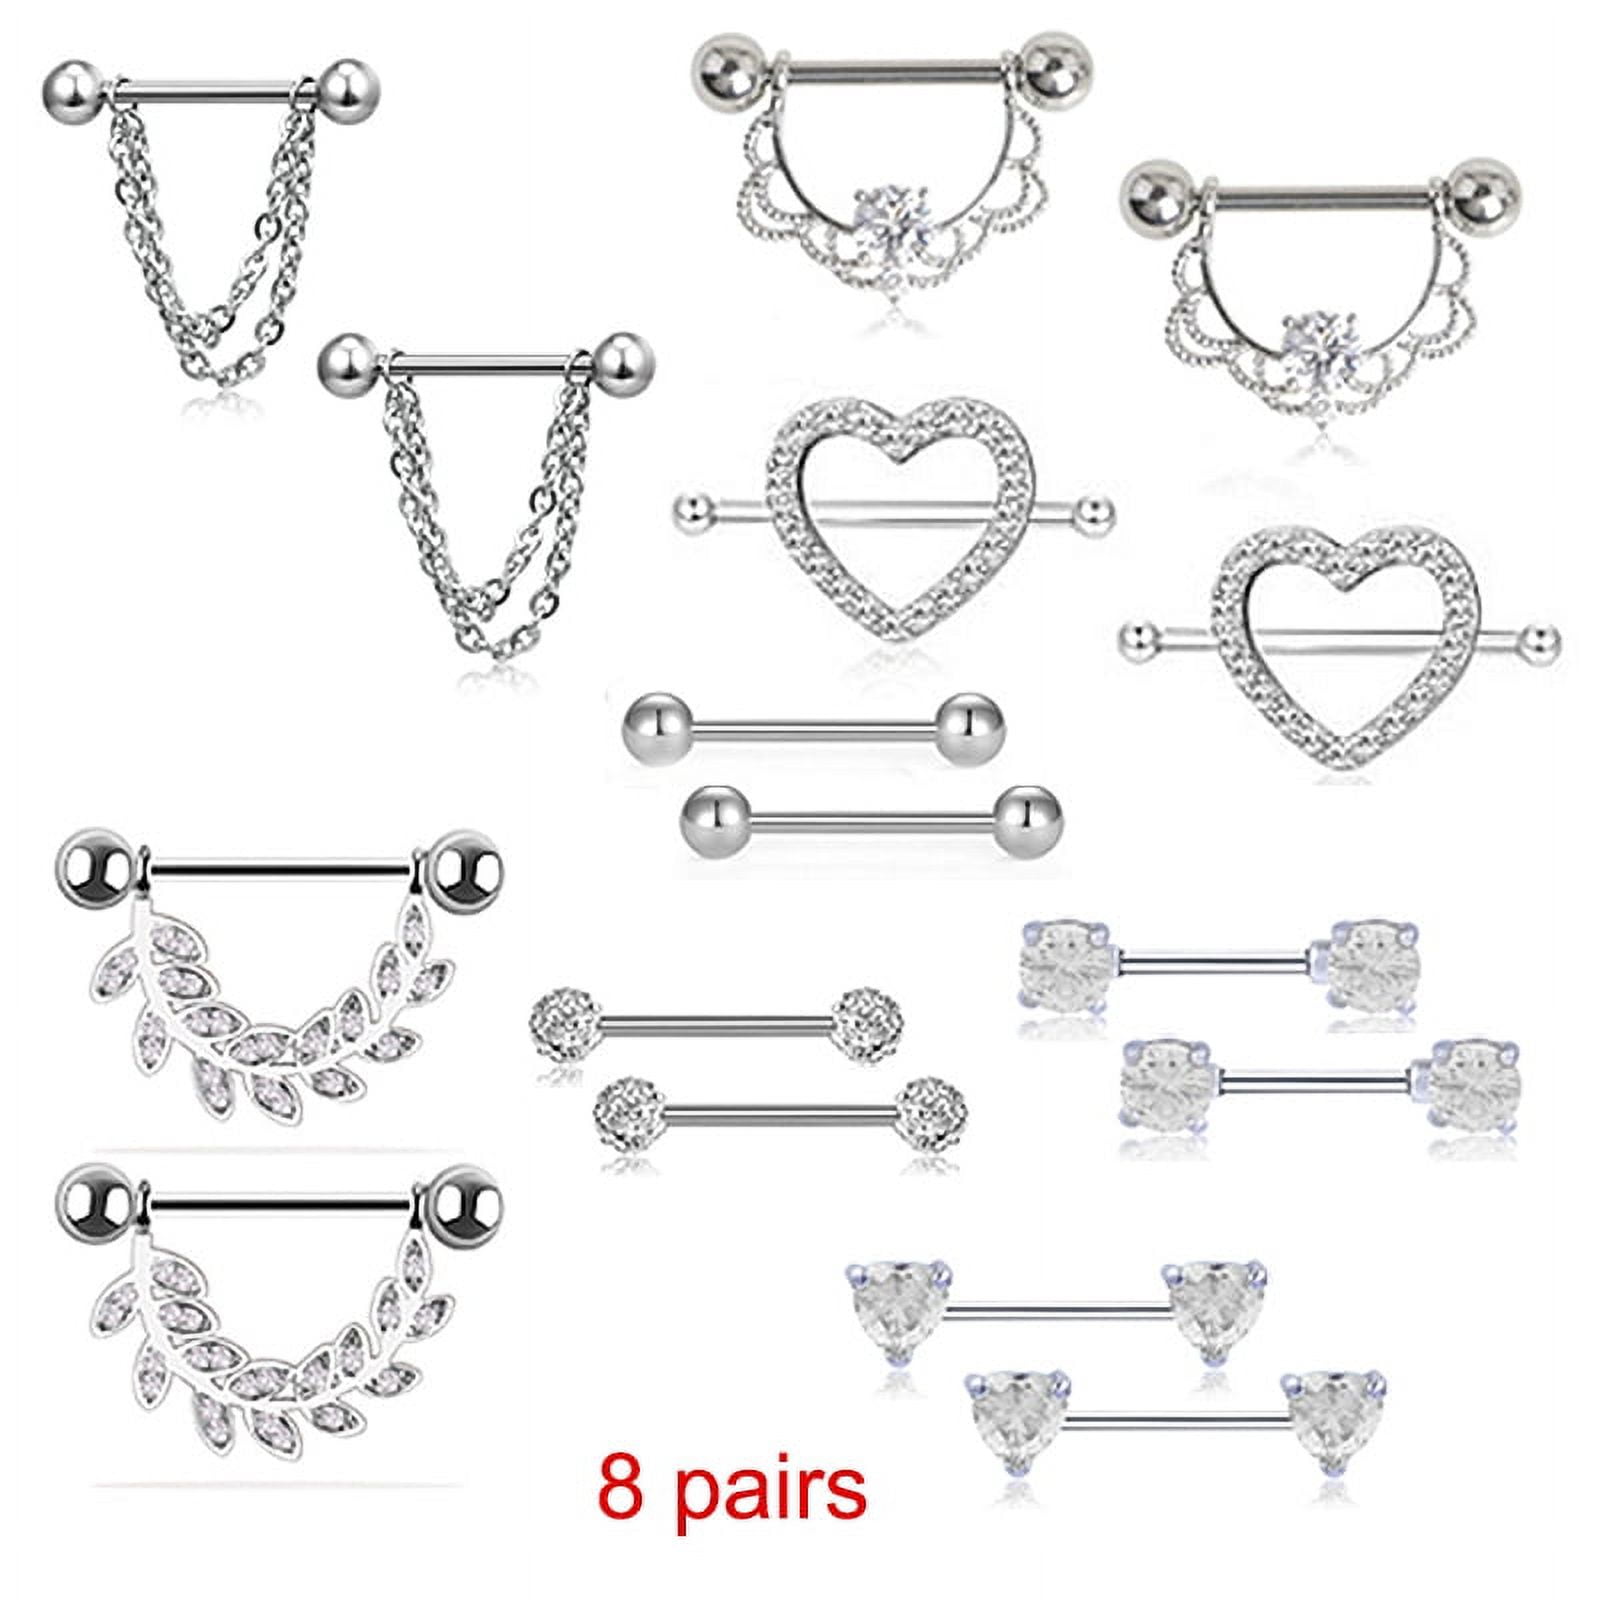 8 Pairs Nipple Rings Set Stainless Steel Hypoallergenic Body Piercing Jewelry f9cfb78a dda1 49d3 927d 99bf5ac68e7f.b8211435df27080a177af1149a68dc94